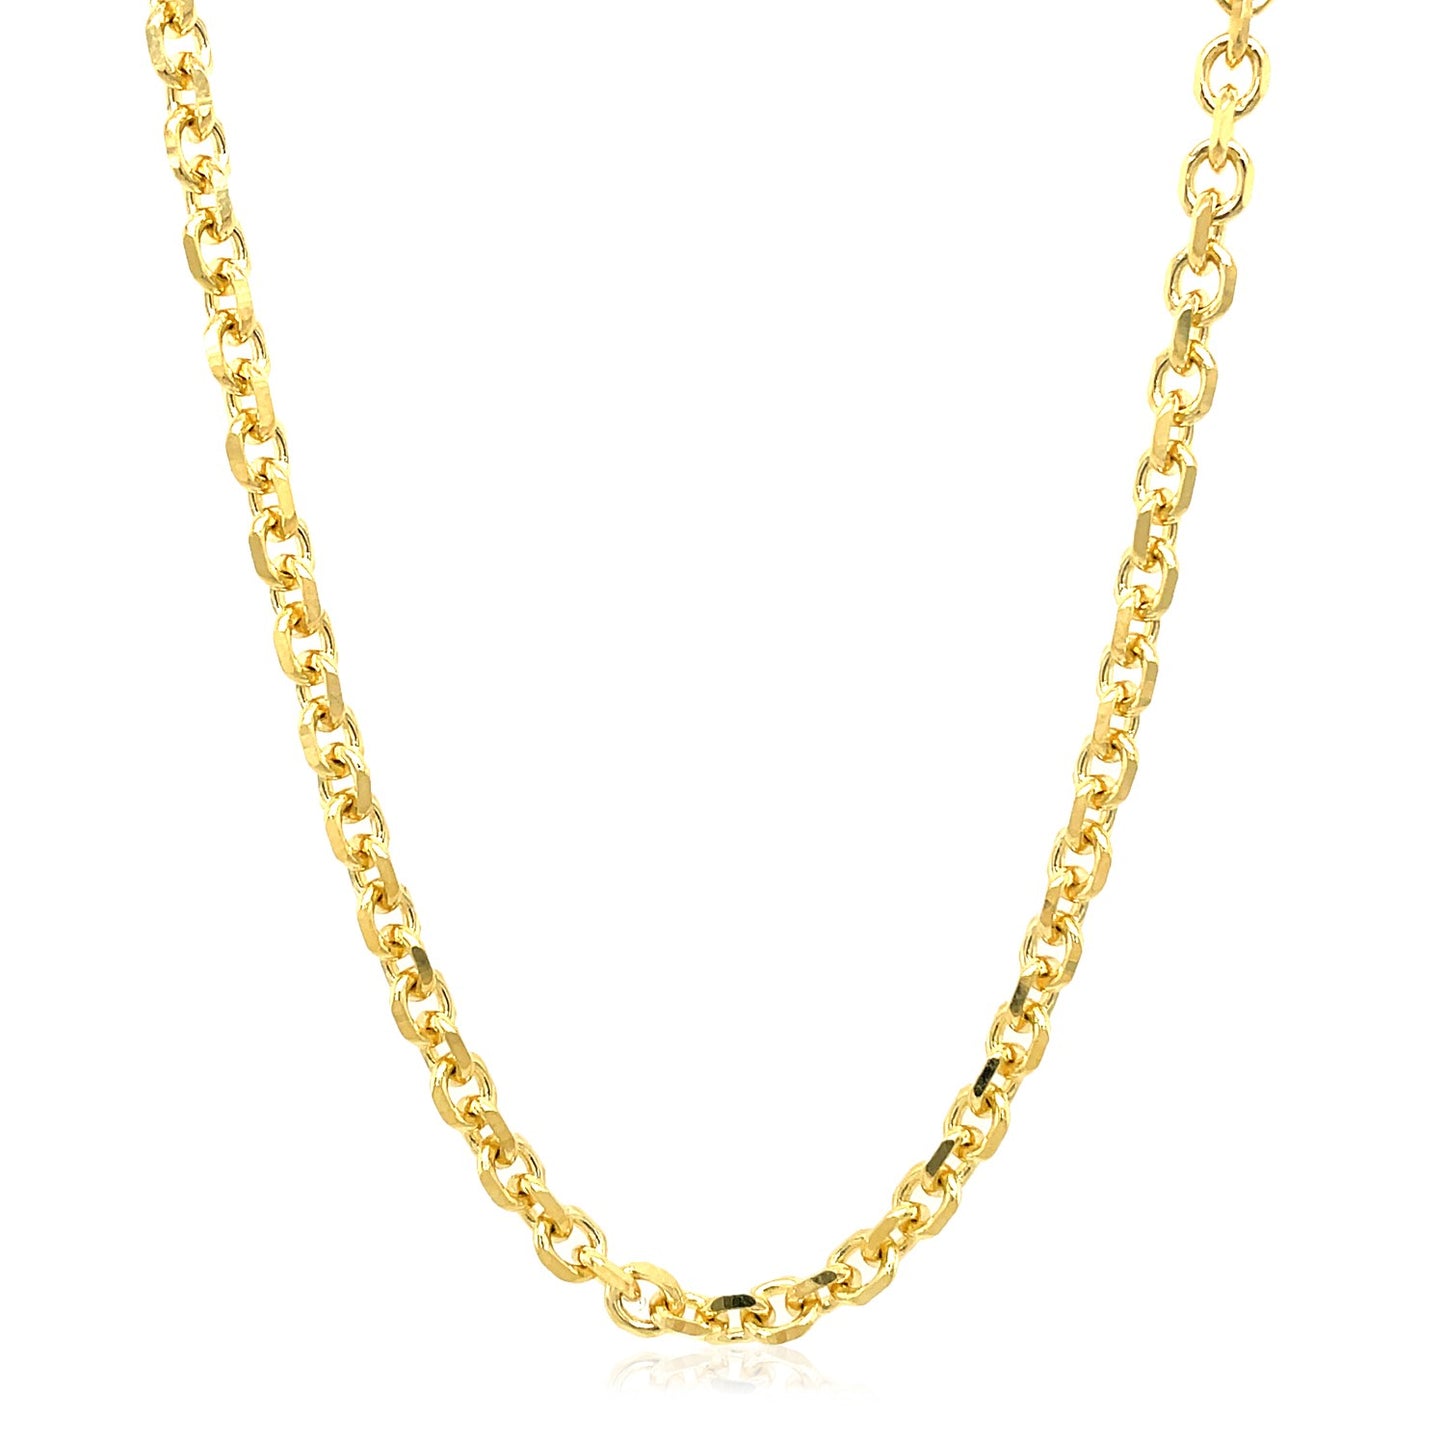 4.0mm 14k Yellow Gold Diamond Cut Cable Link Chain